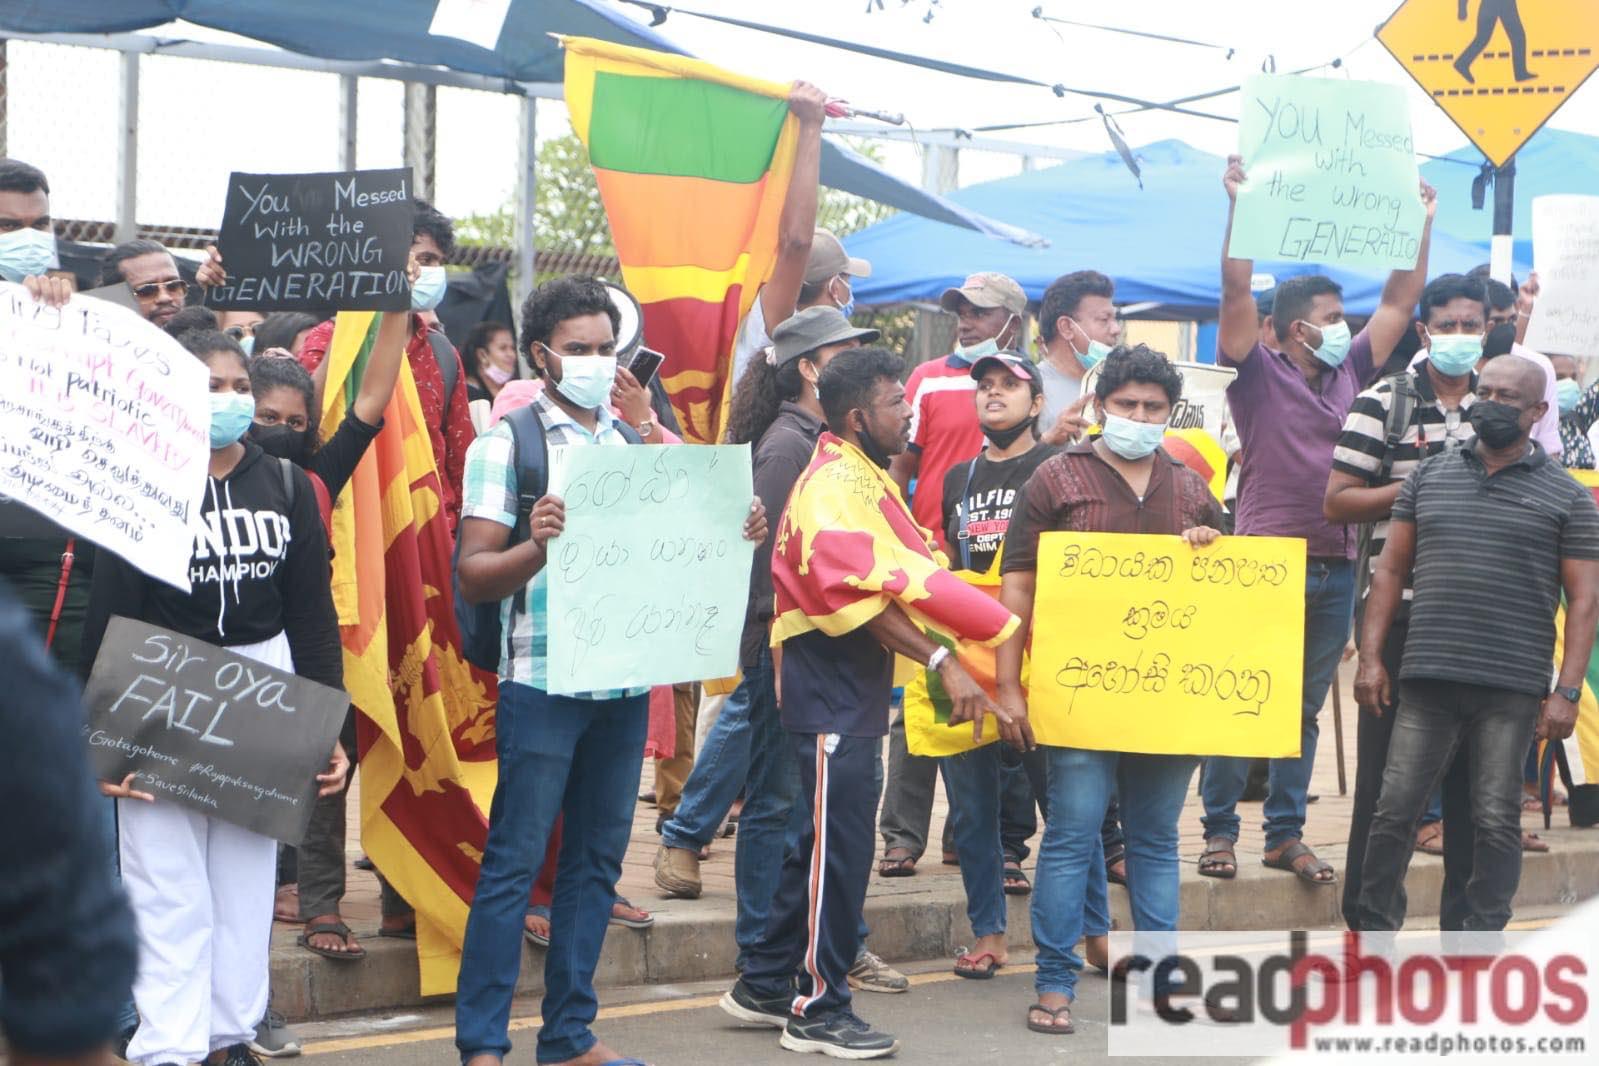 People protest against the current government - 11.04.2022 - Read Photos